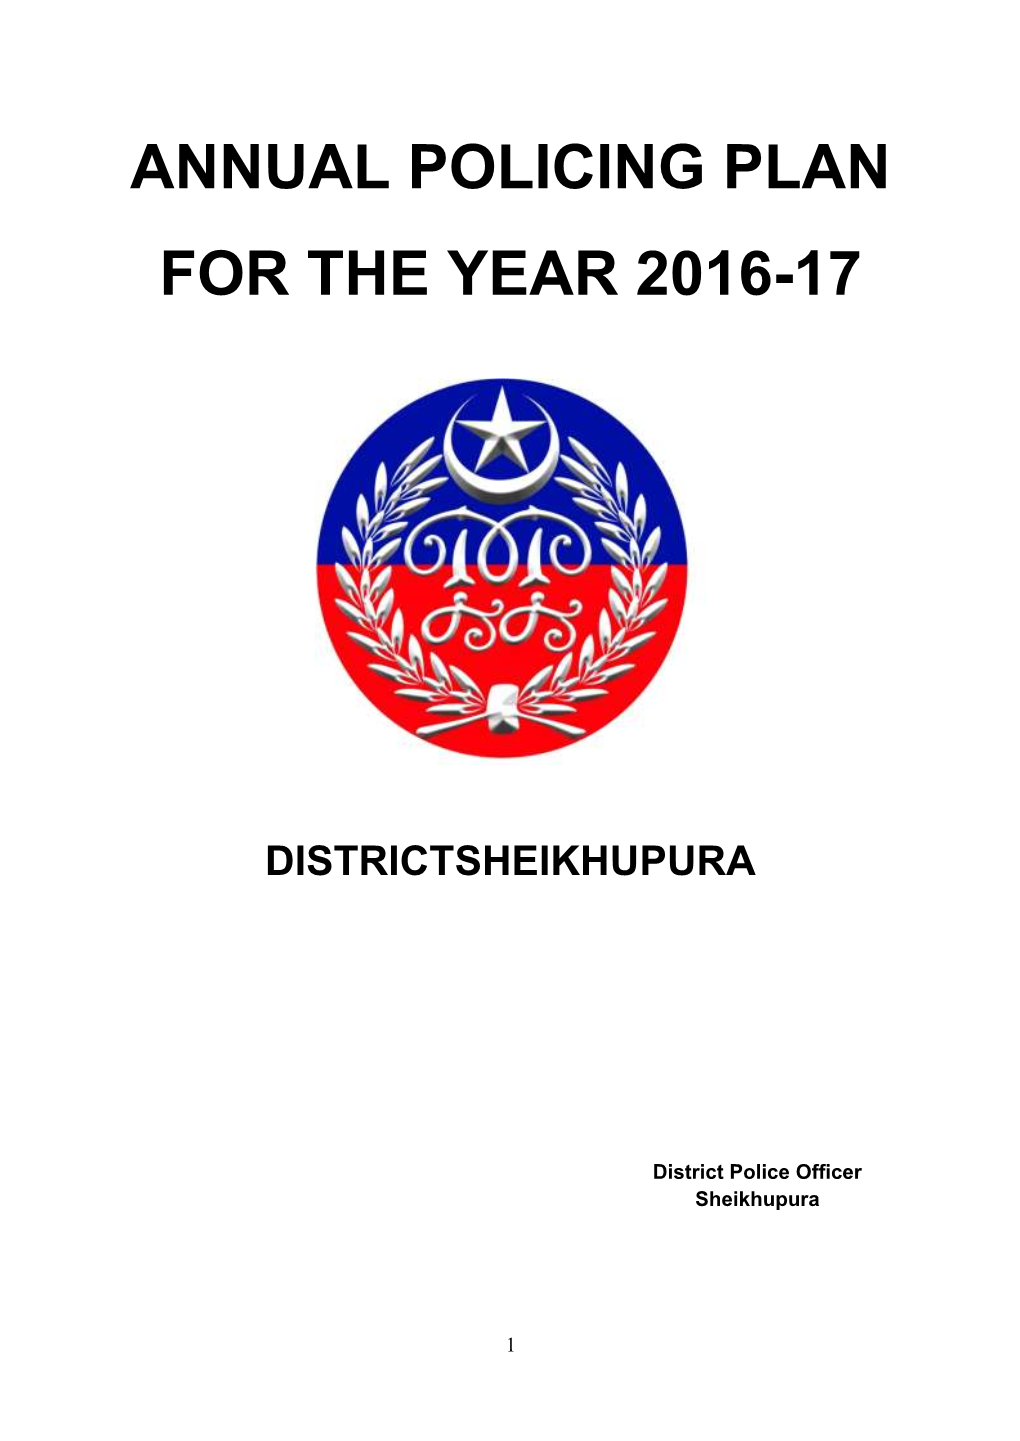 Annual Policing Plan for the Year 2016-17